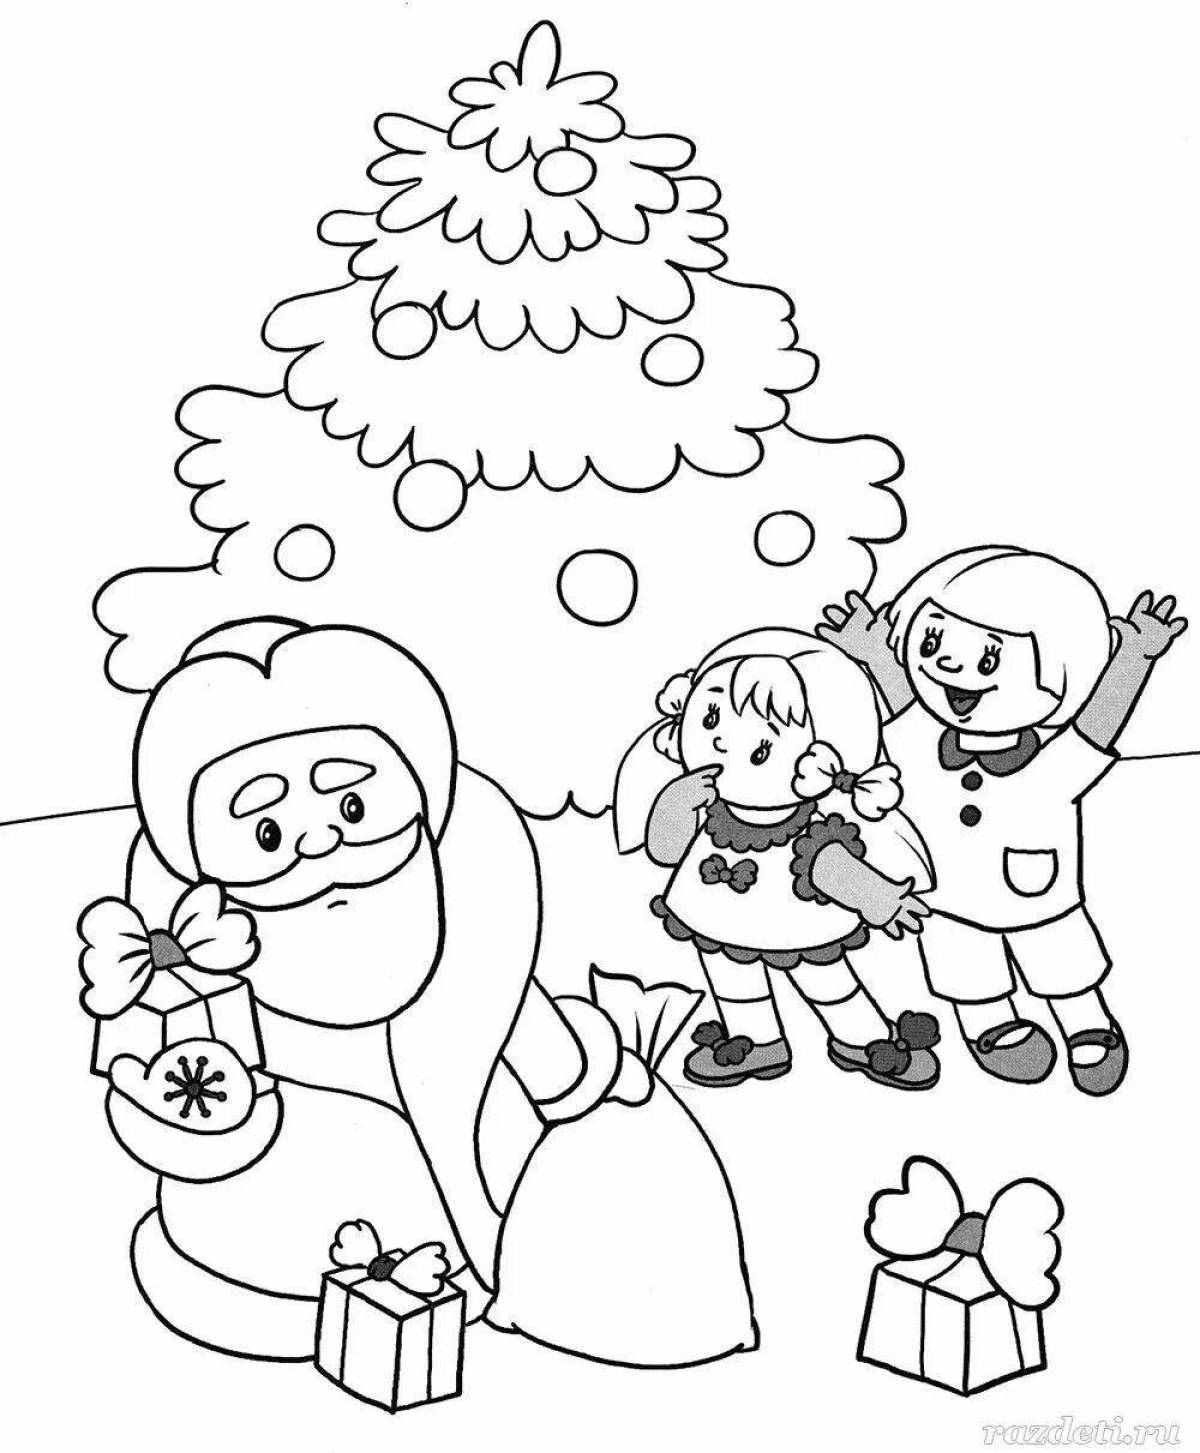 Coloring page 5 years of winter